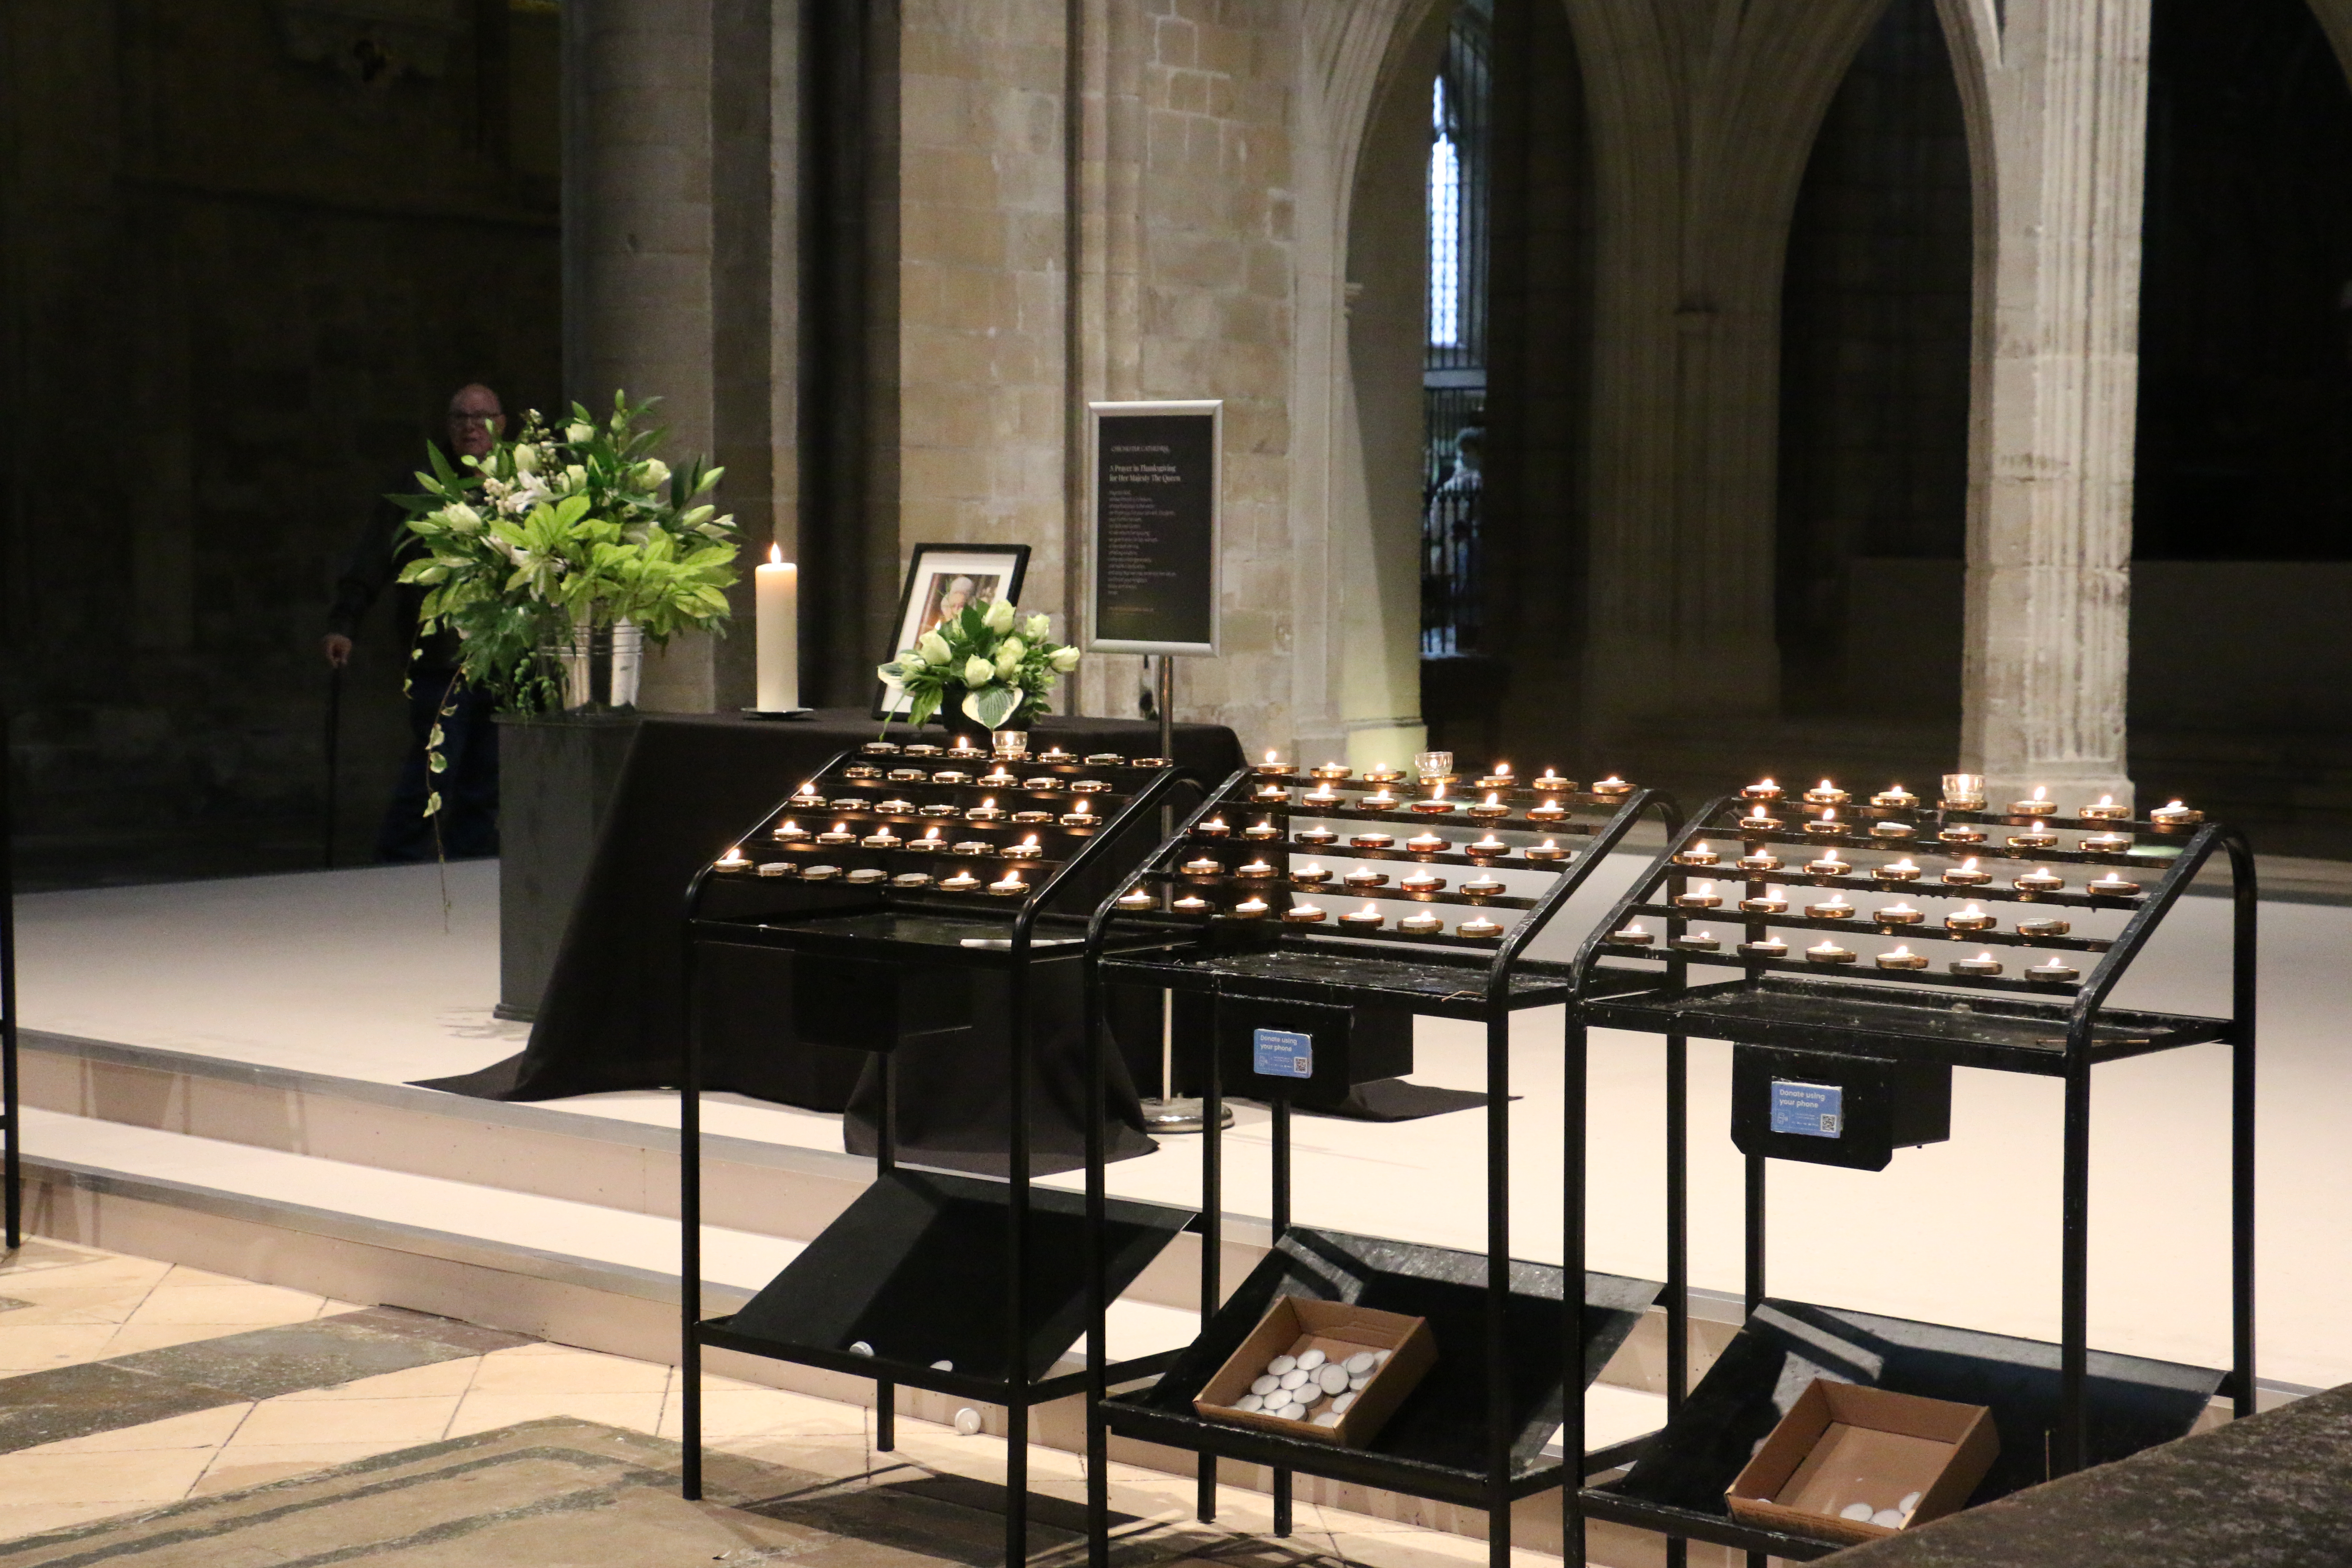 Votive stands hold lit candles in the Nave